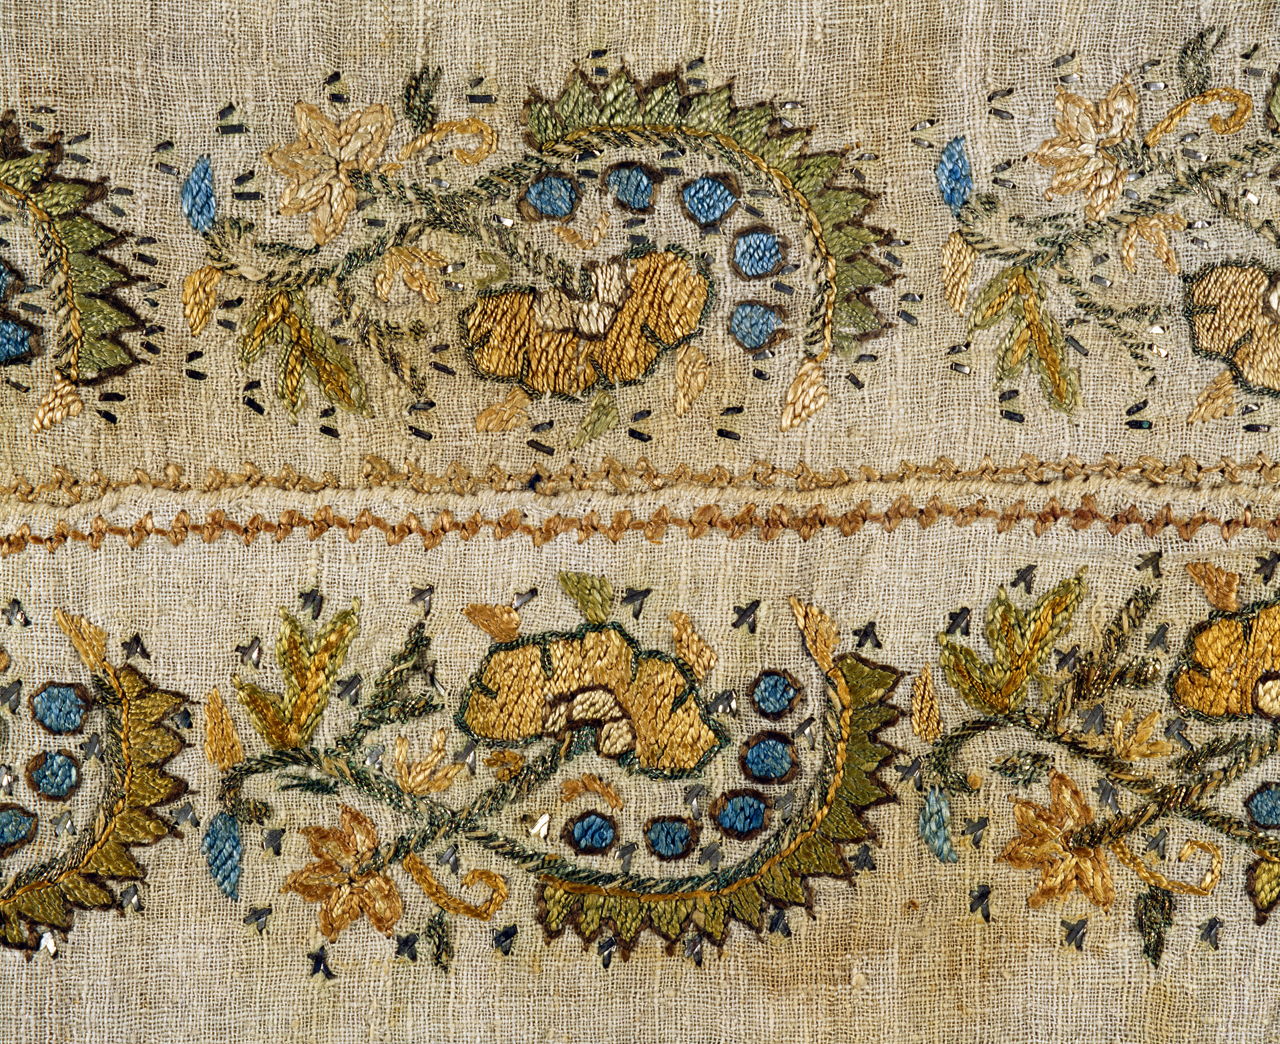 history of embroidery presentation